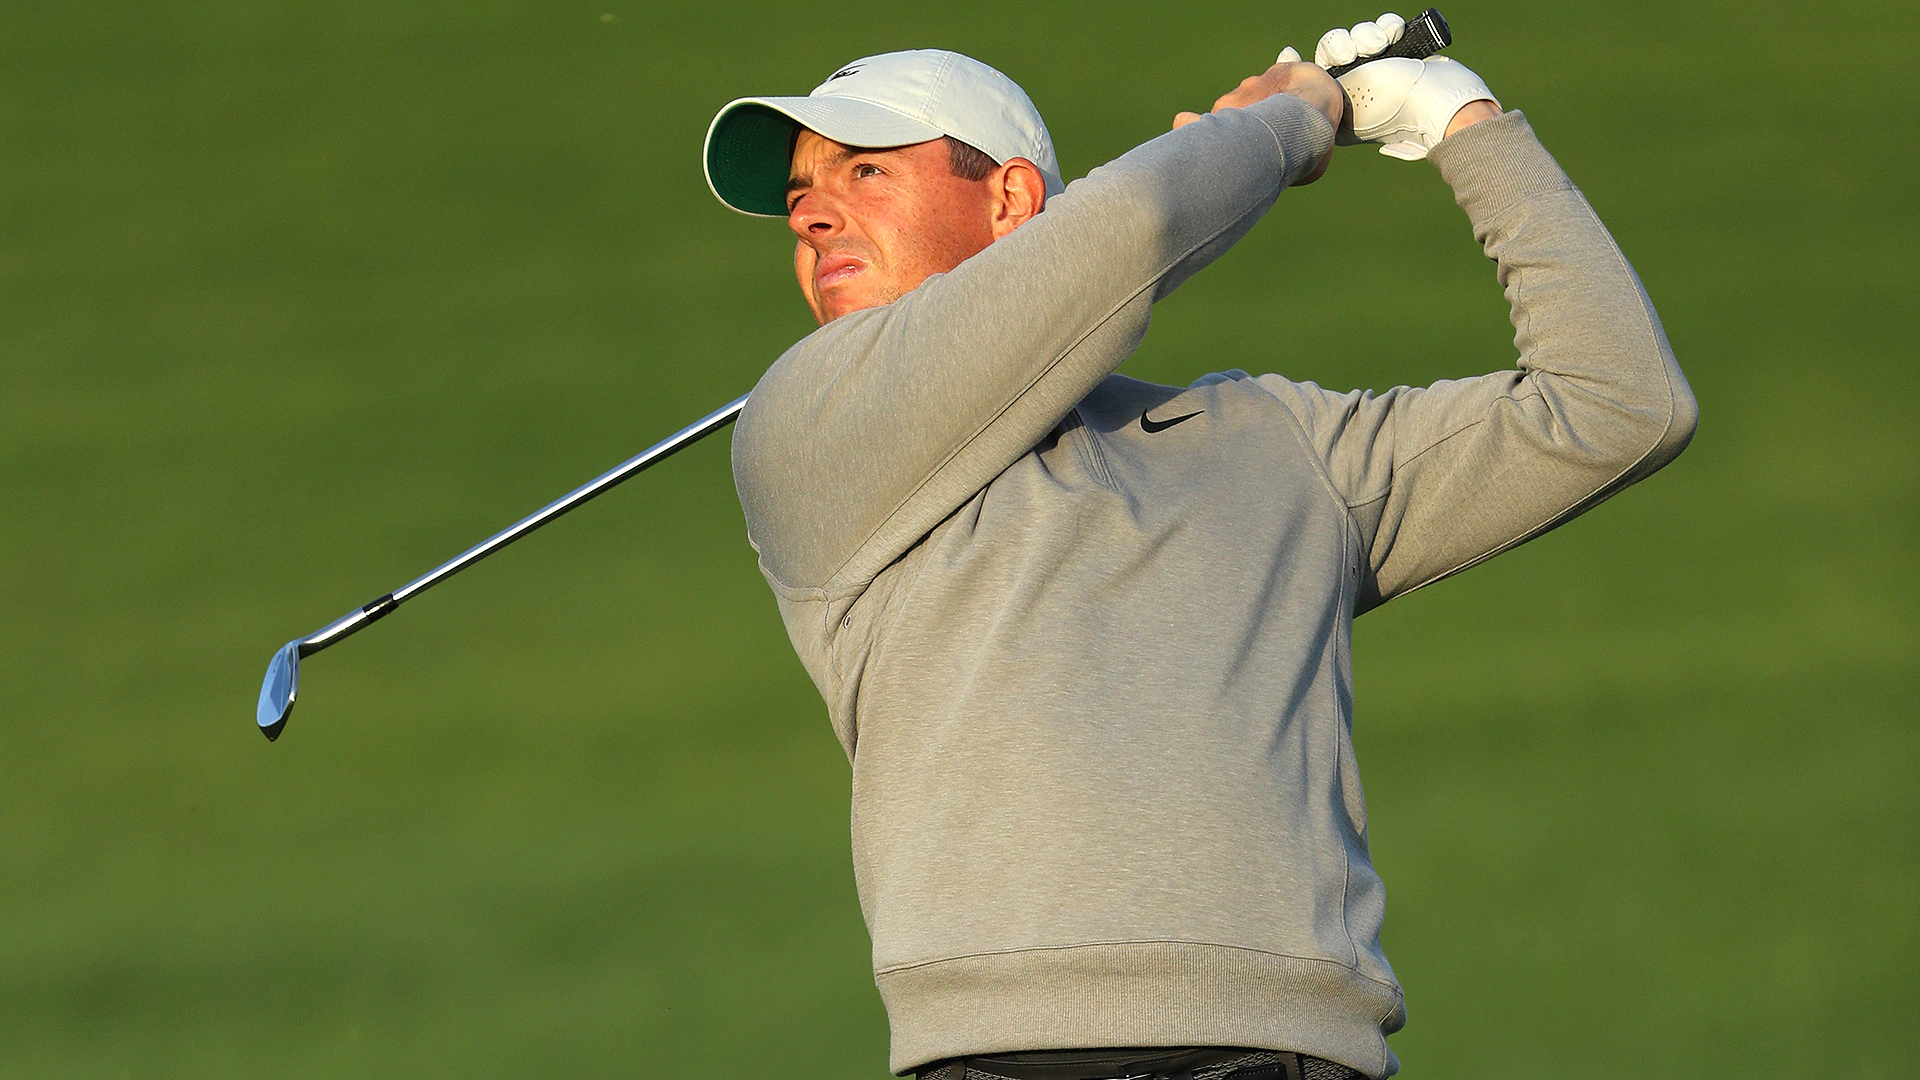 Get ready to see a lot of Rory McIlroy as his PGA Tour schedule ramps up